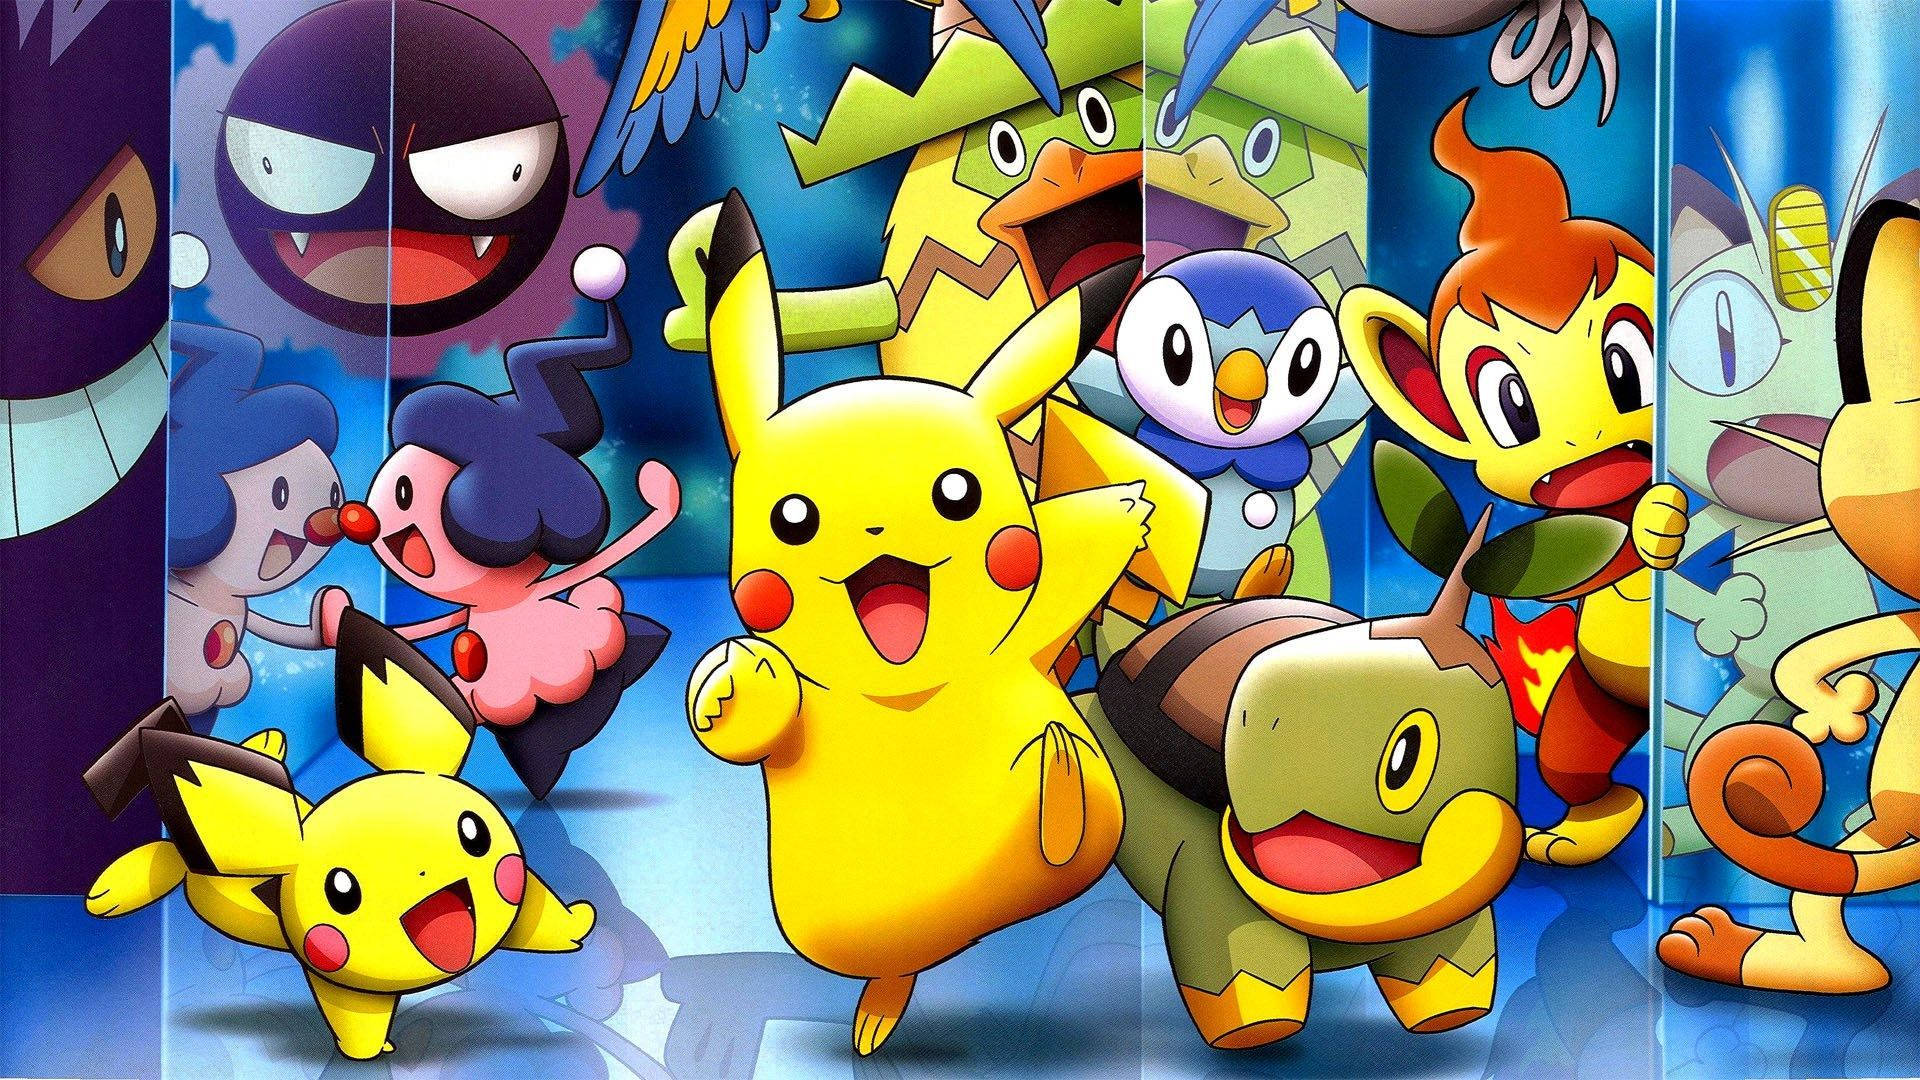 Pikachu with other Pokemon friends wallpaper 